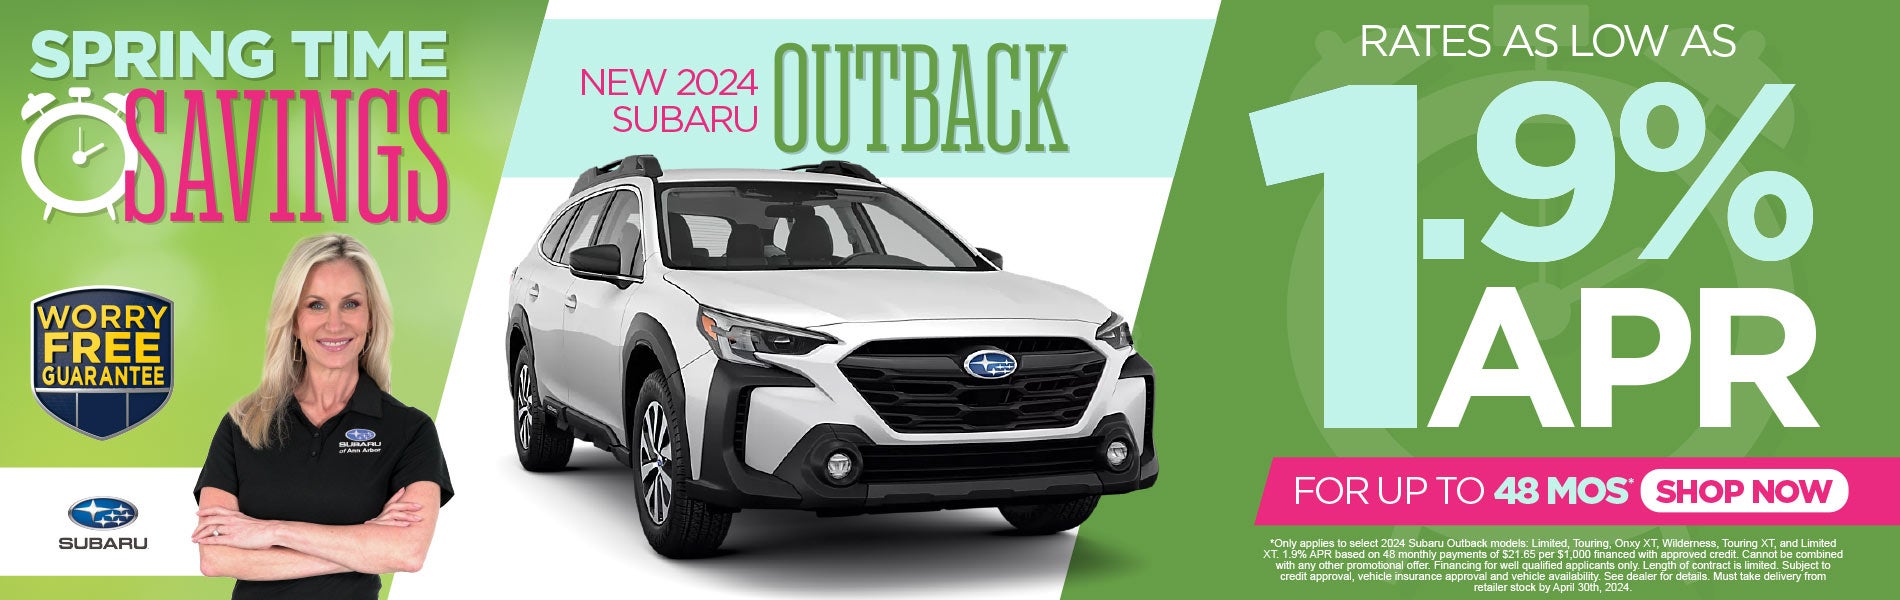 New 2024 Subaru Outback rates as low as 1.9%